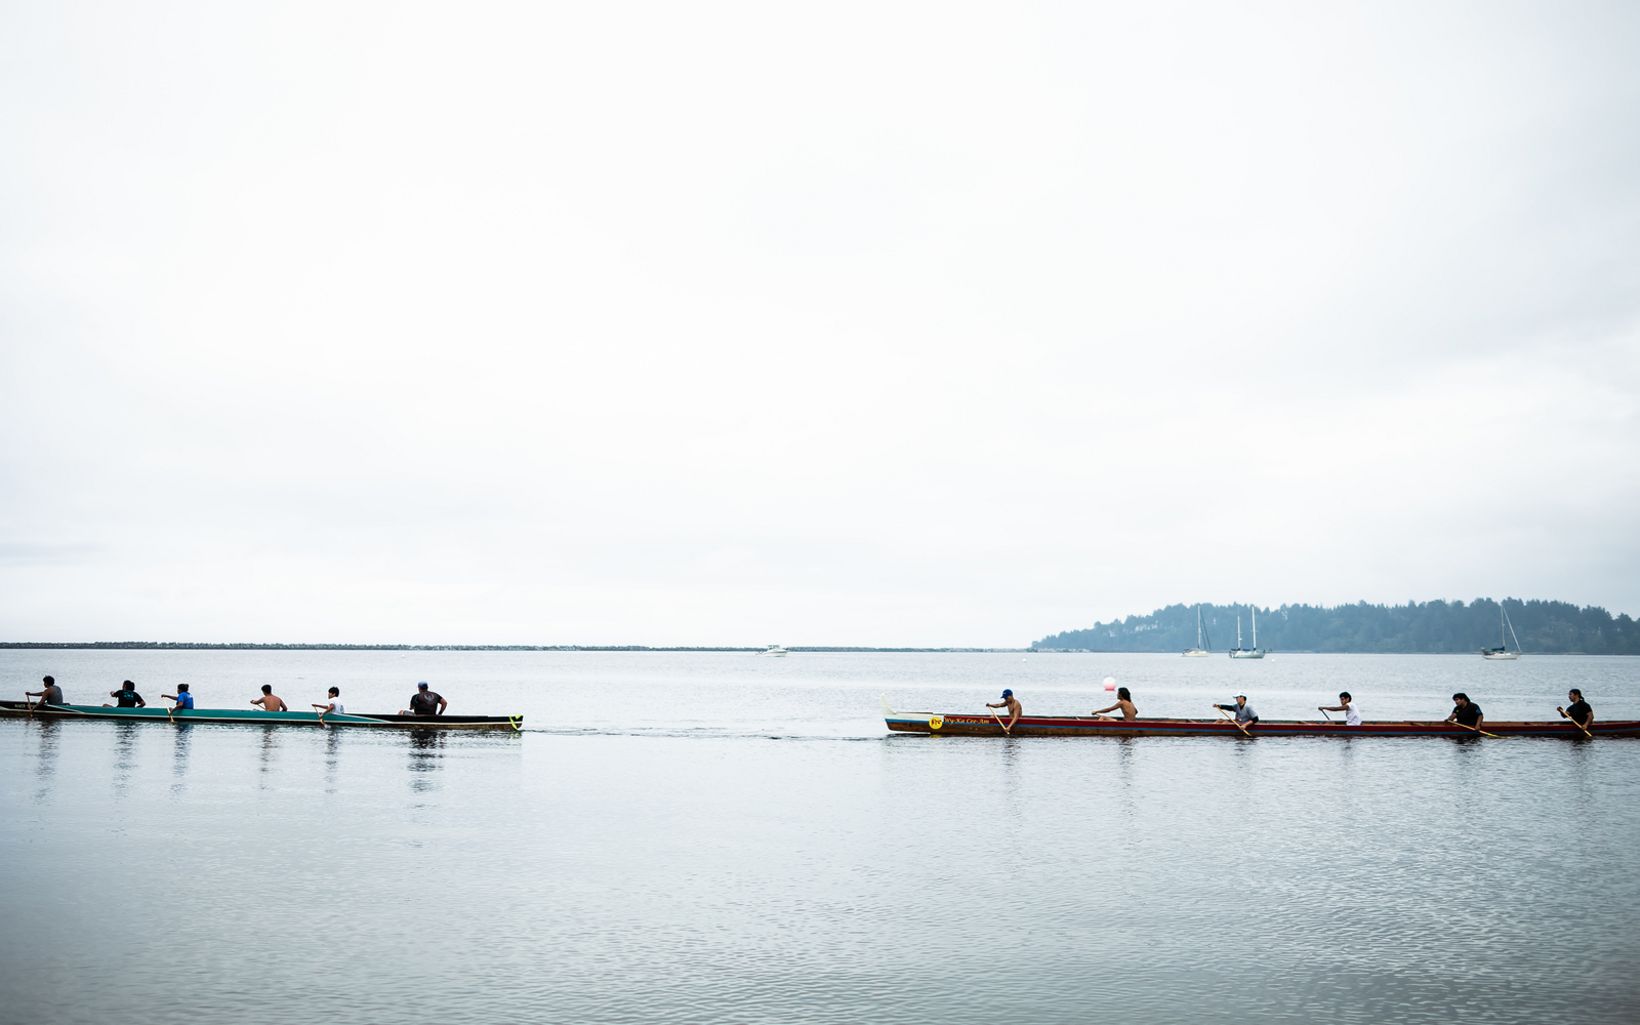 Tribal members travel by canoe in Washington state.